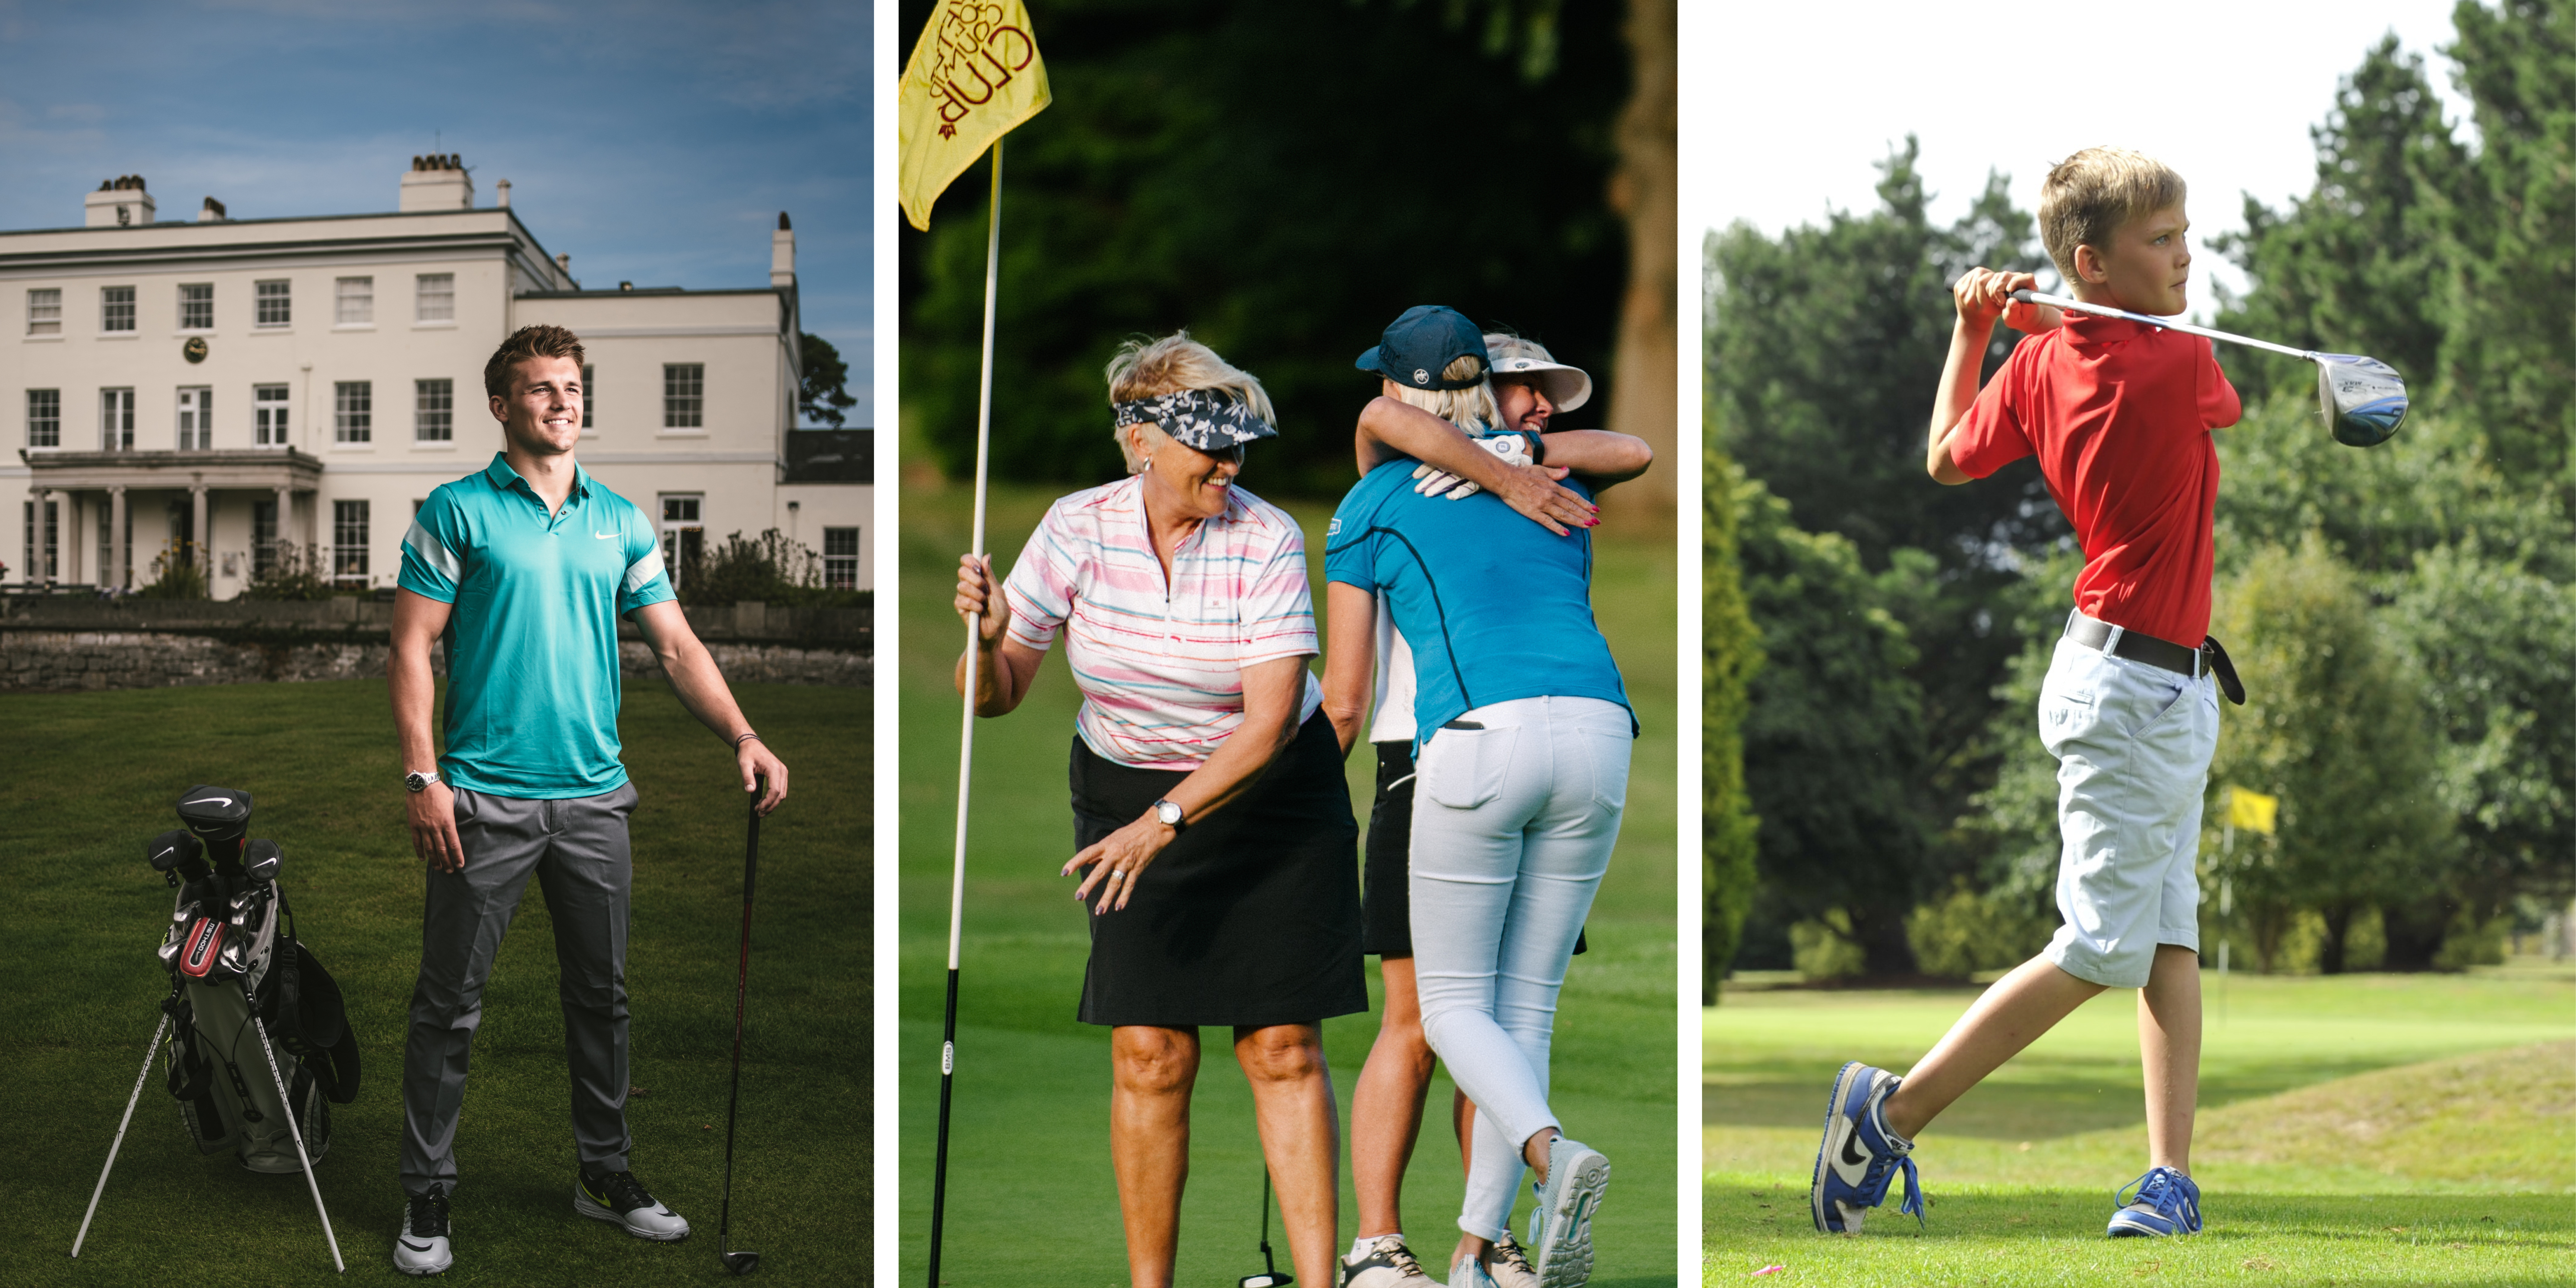 exeter golf and country club pro ams, junior pro am devon, mens pro am devon, ladies pro am devon